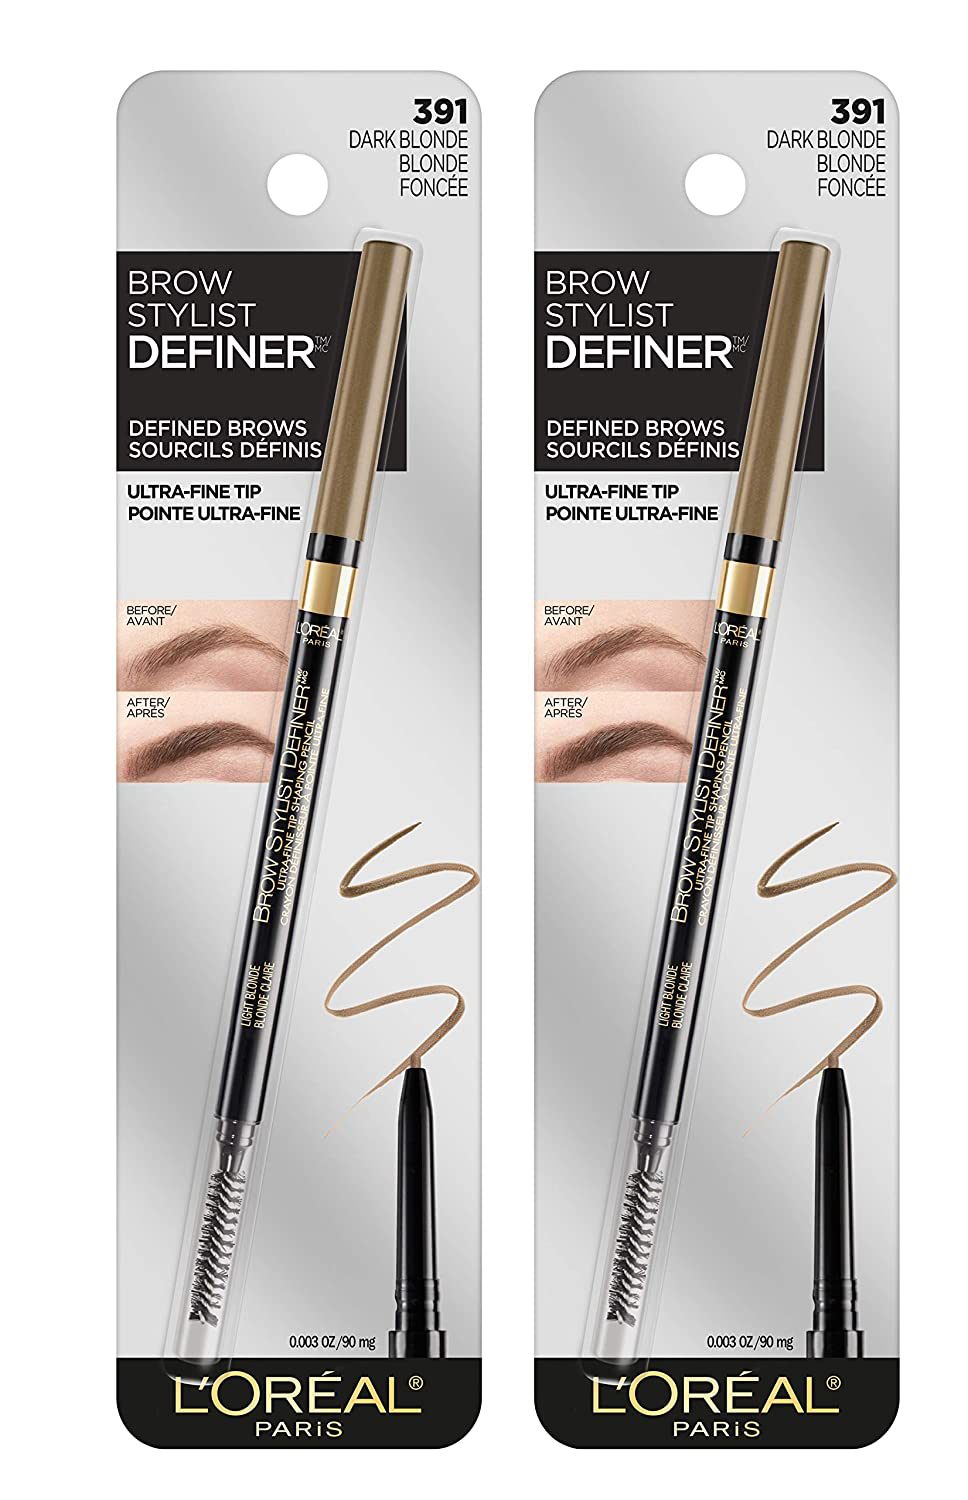 L'Oreal Paris Makeup Brow Stylist Definer Waterproof Eyebrow Pencil UltraFine Mechanical Pencil Draws Tiny Brow Hairs Fills in Sparse Areas Gaps Ounce Count